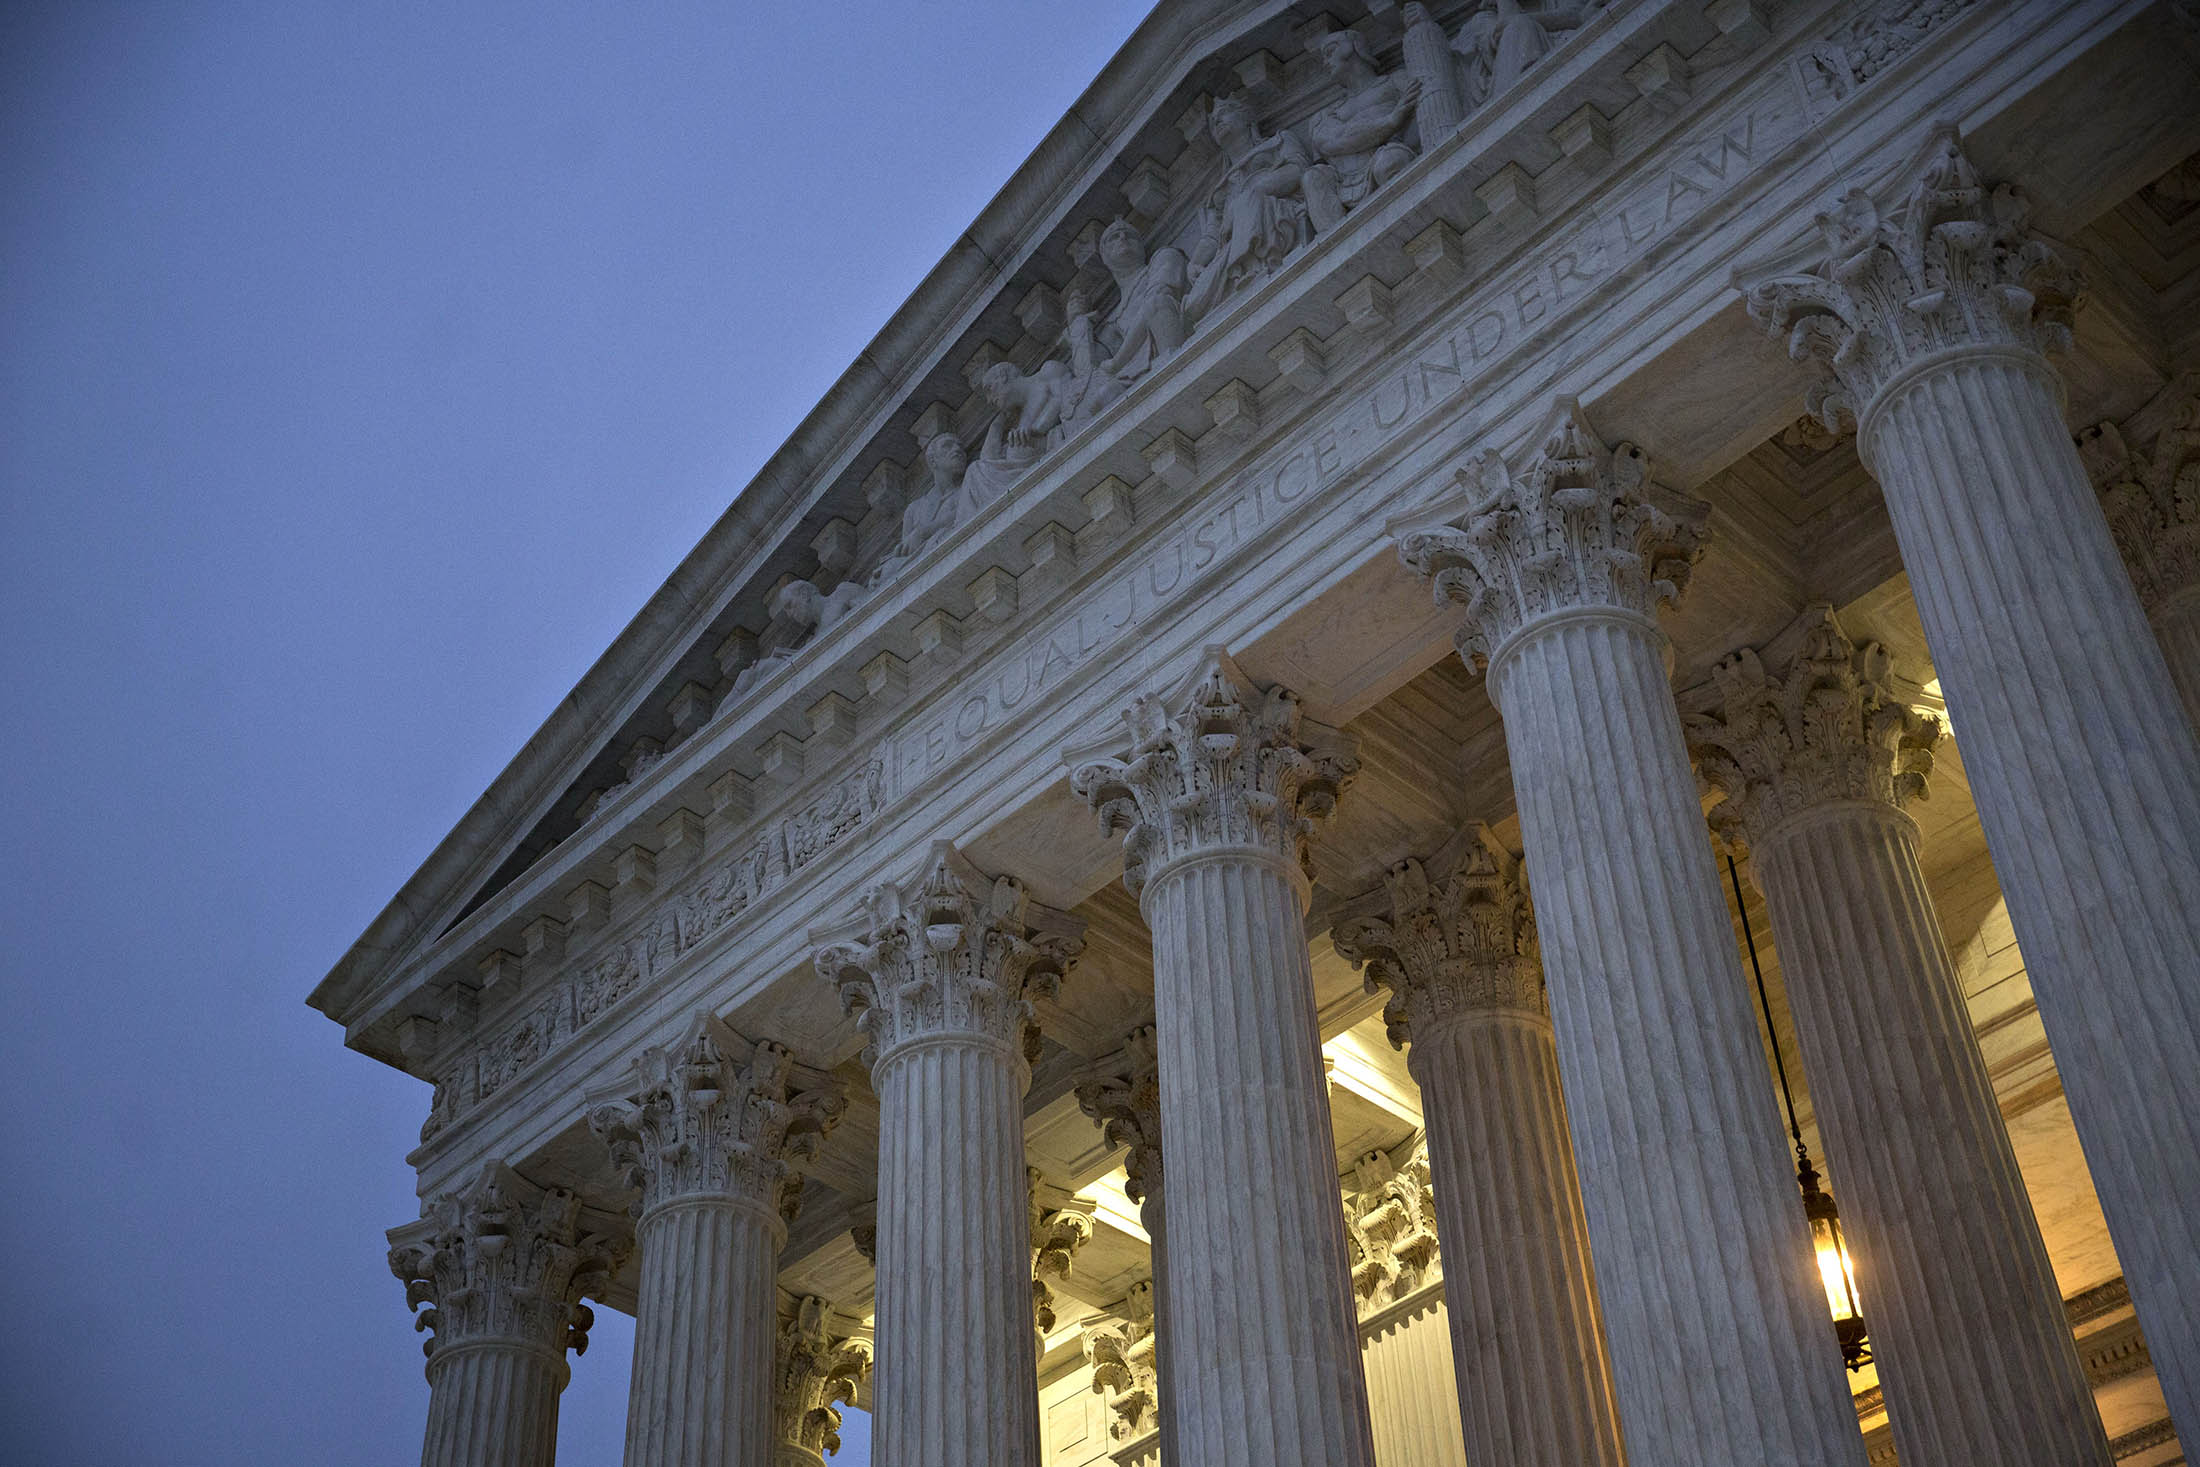 The U.S. Supreme Court building stands in Washington, D.C.
